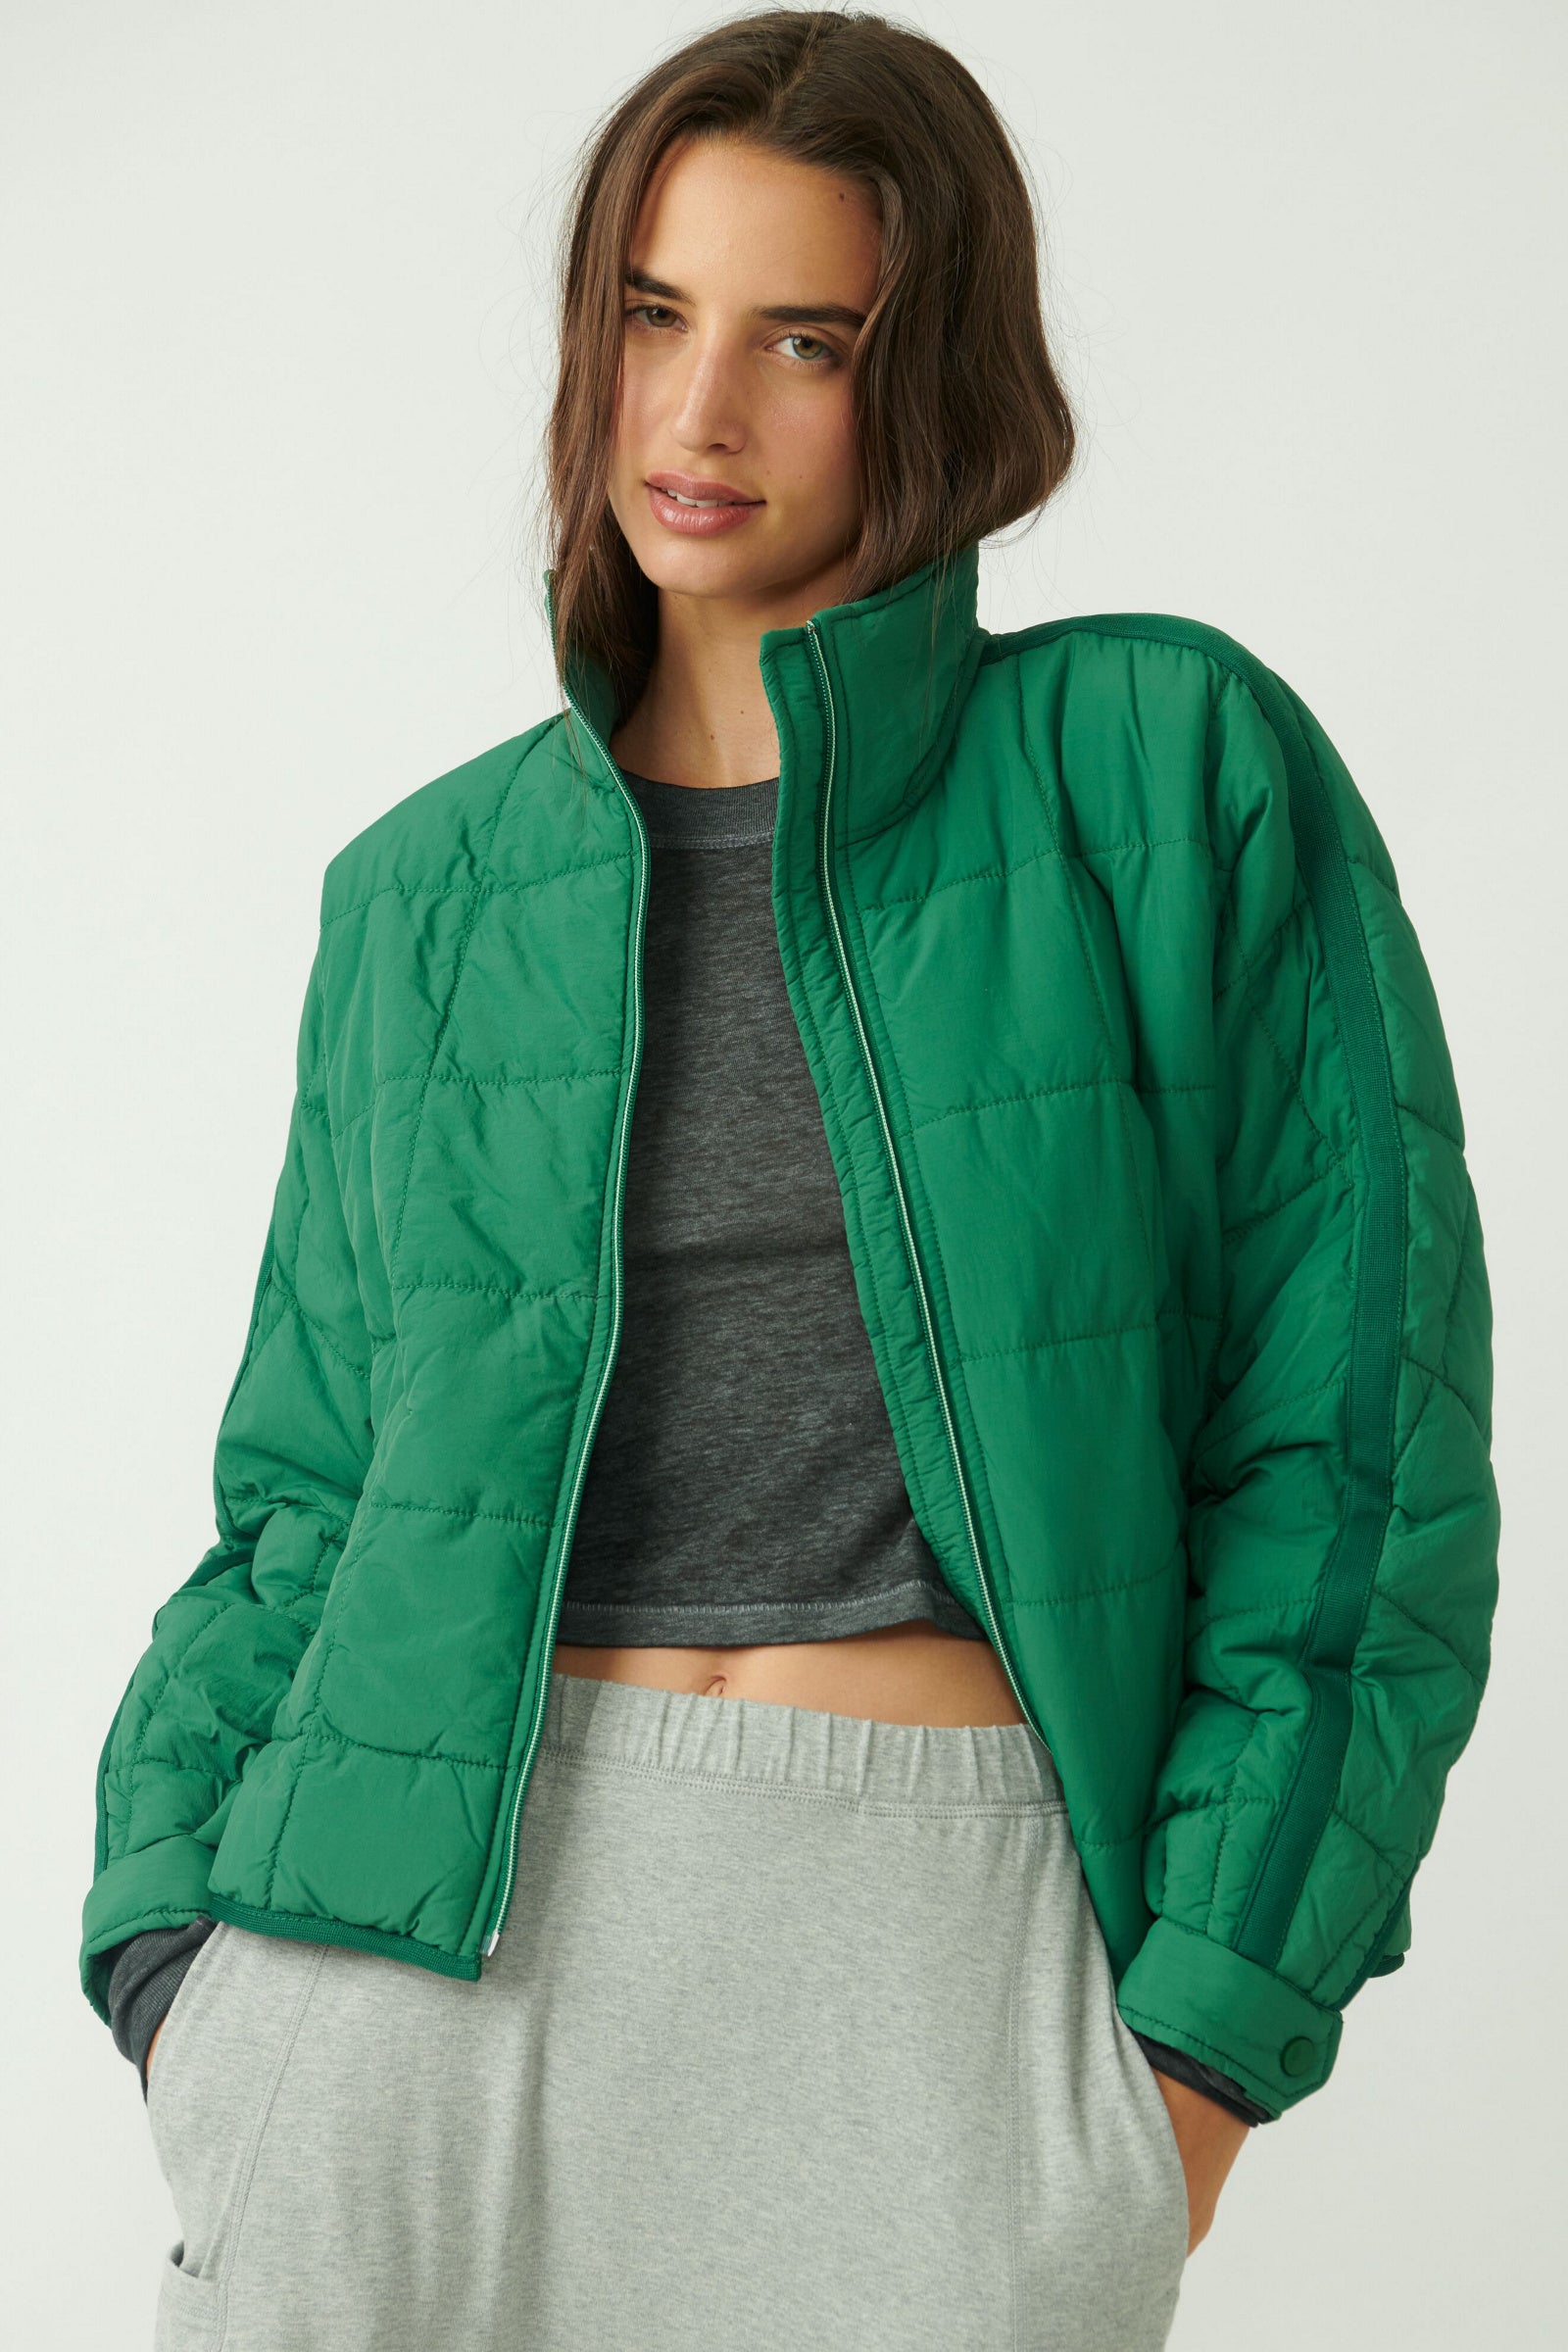 FREE PEOPLE MOVEMENT HIT THE SLOPES JACKET - FRESH SQUEEZED 1410